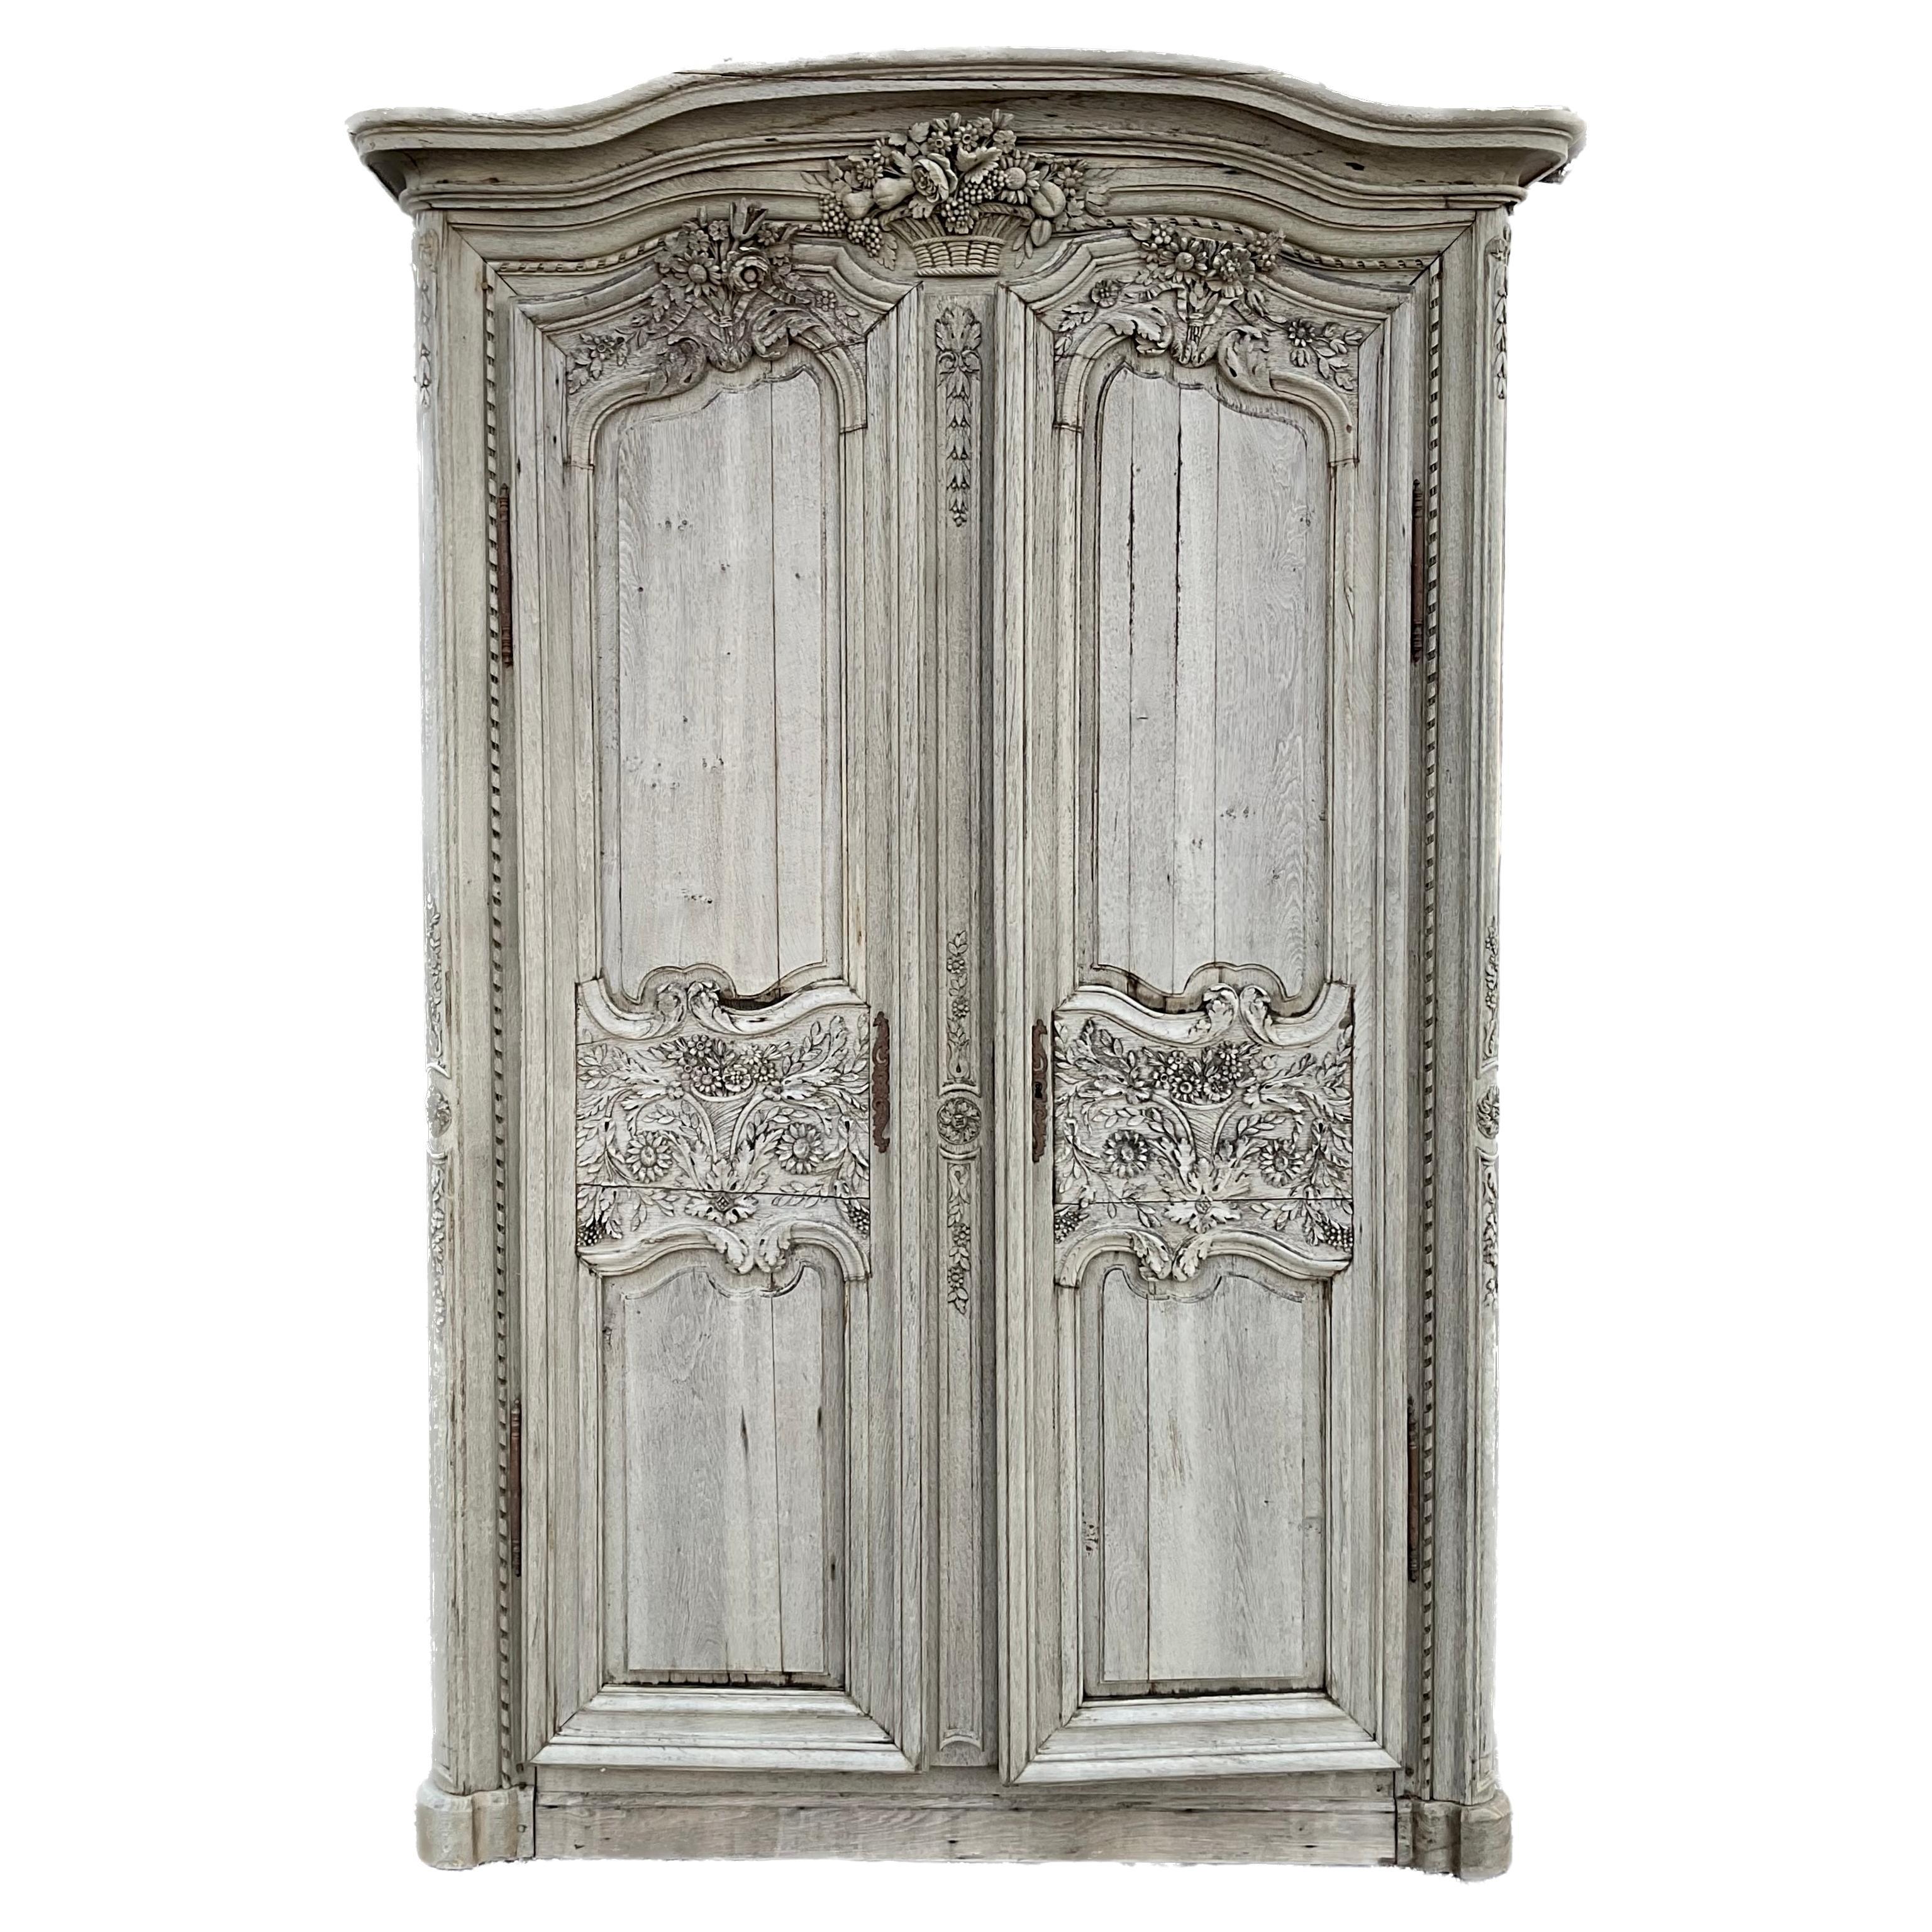 Early 18th Century Bleached Oak Wedding Armoire from France